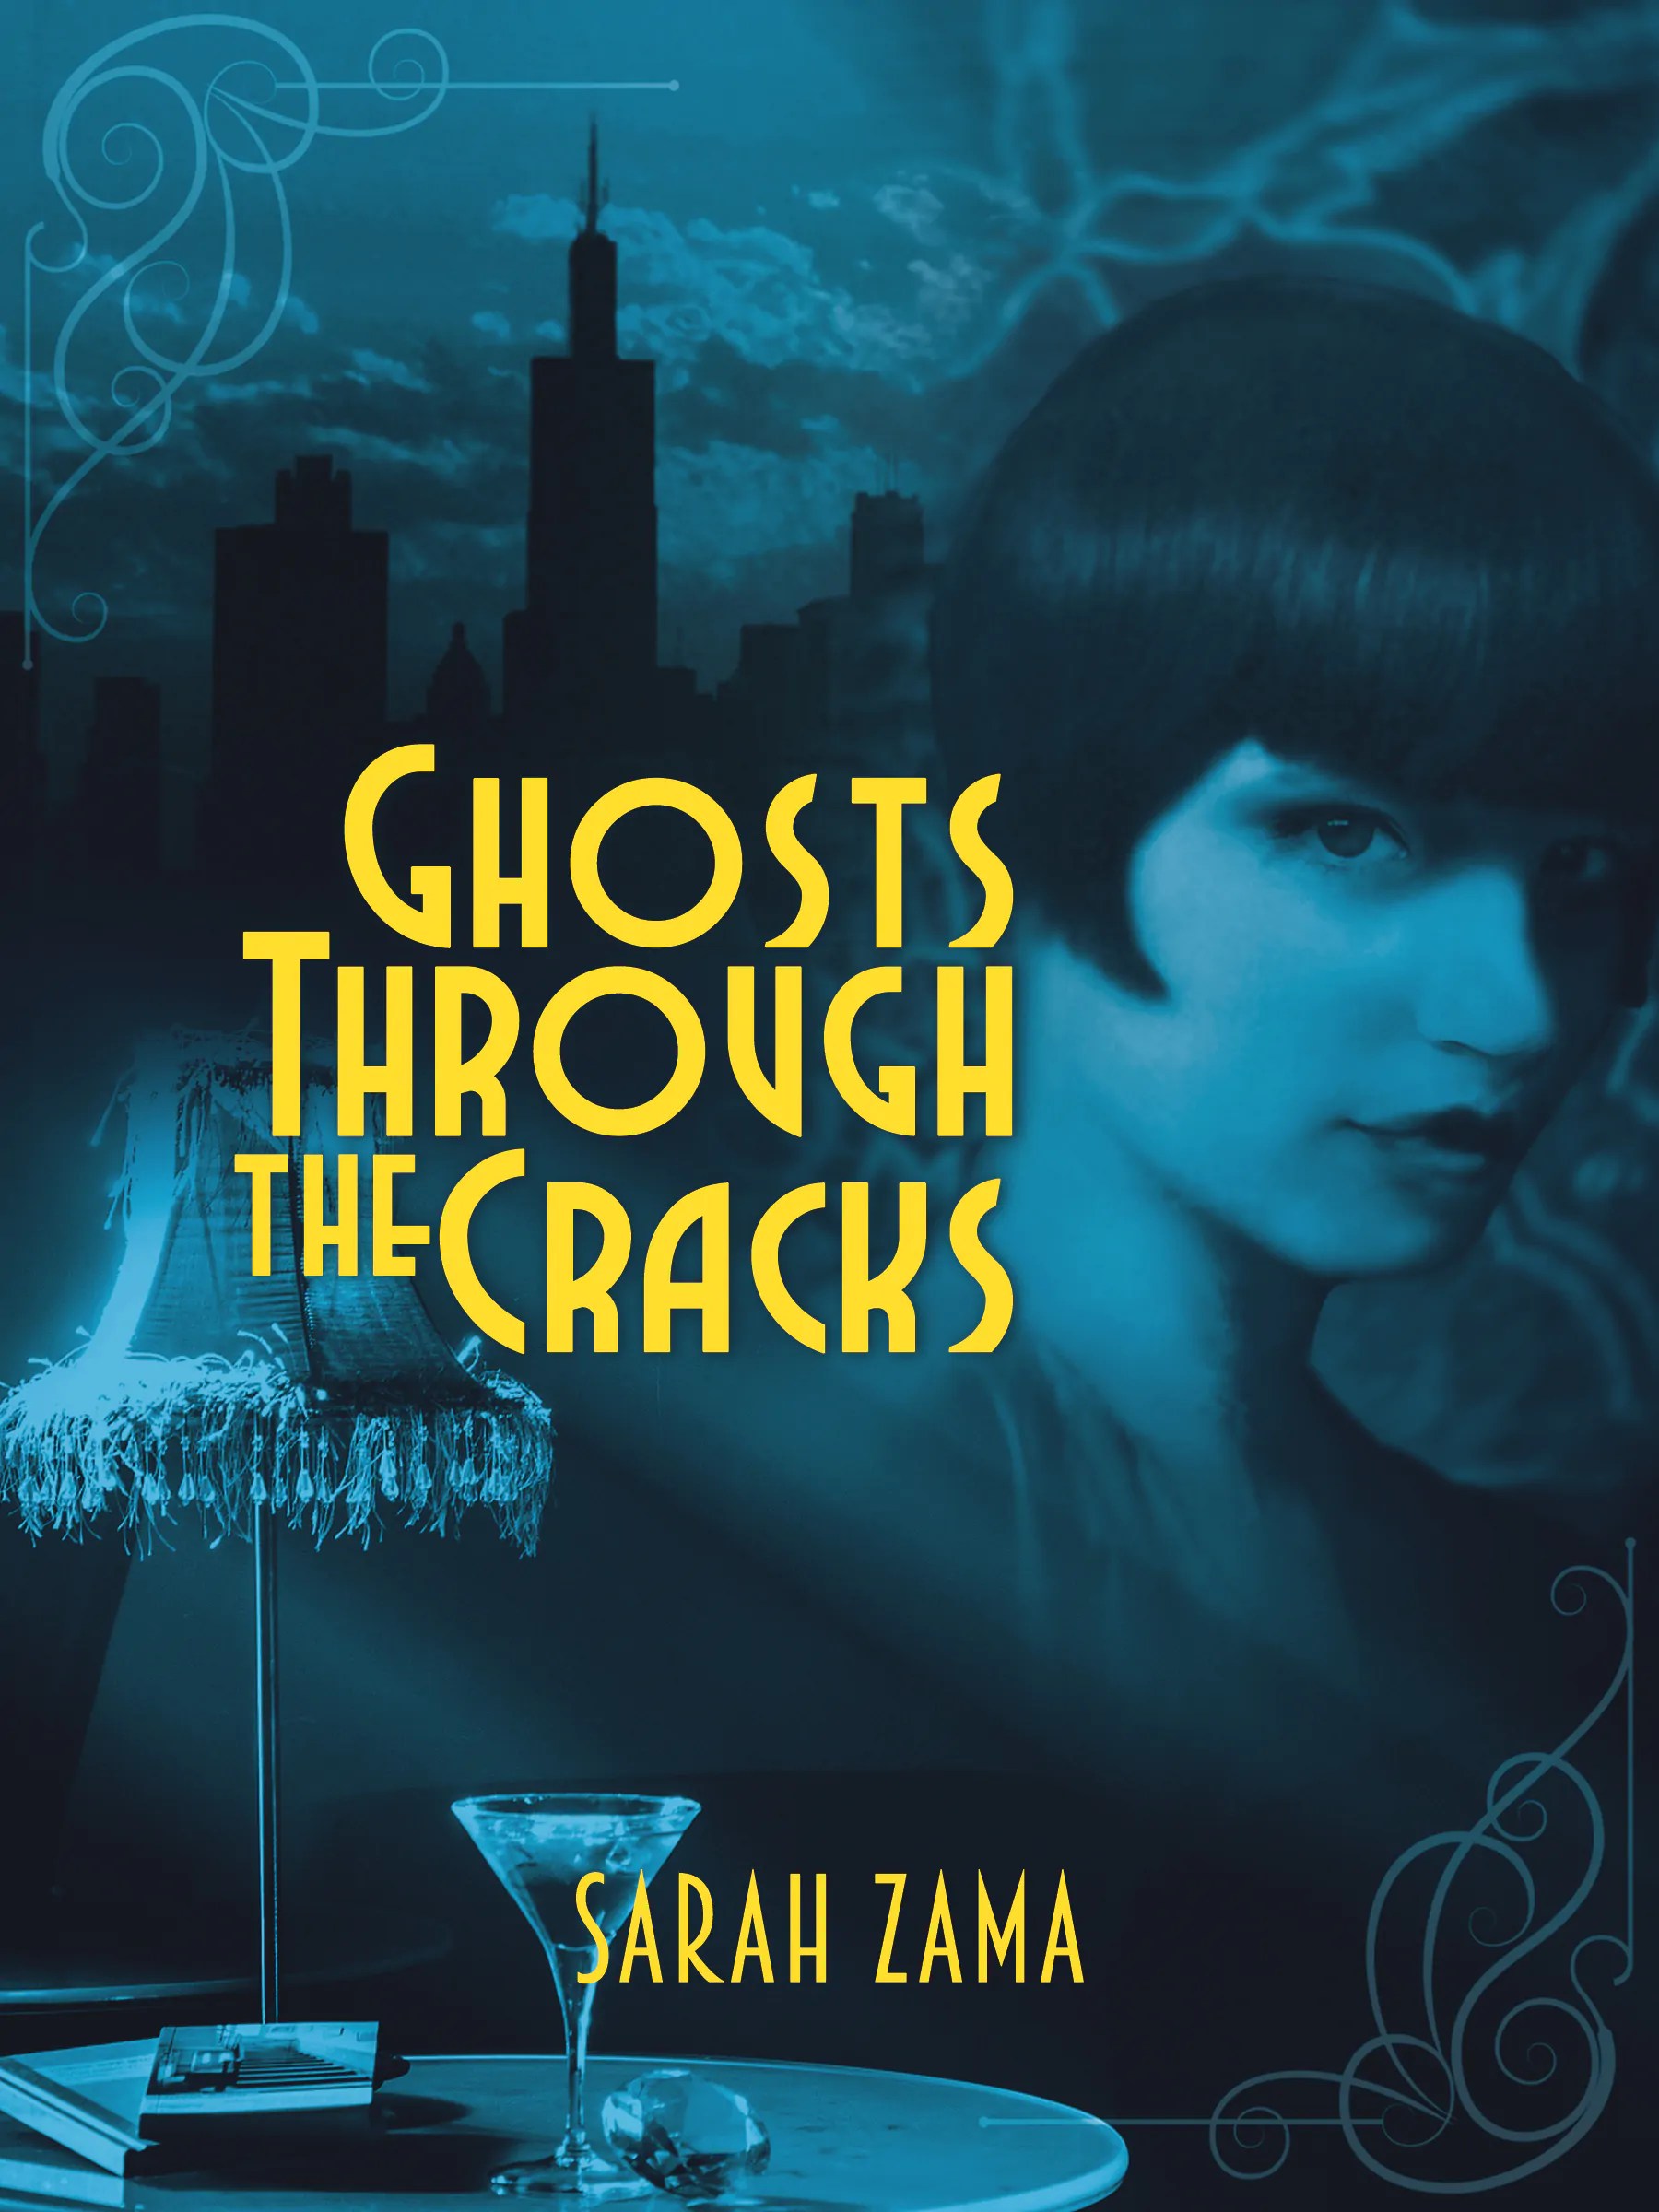 She calls it being true to herself. He calls it betrayal - Ghosts Trhough the Cracks by Sarah Zama (a 1920s historical fantasy novella)